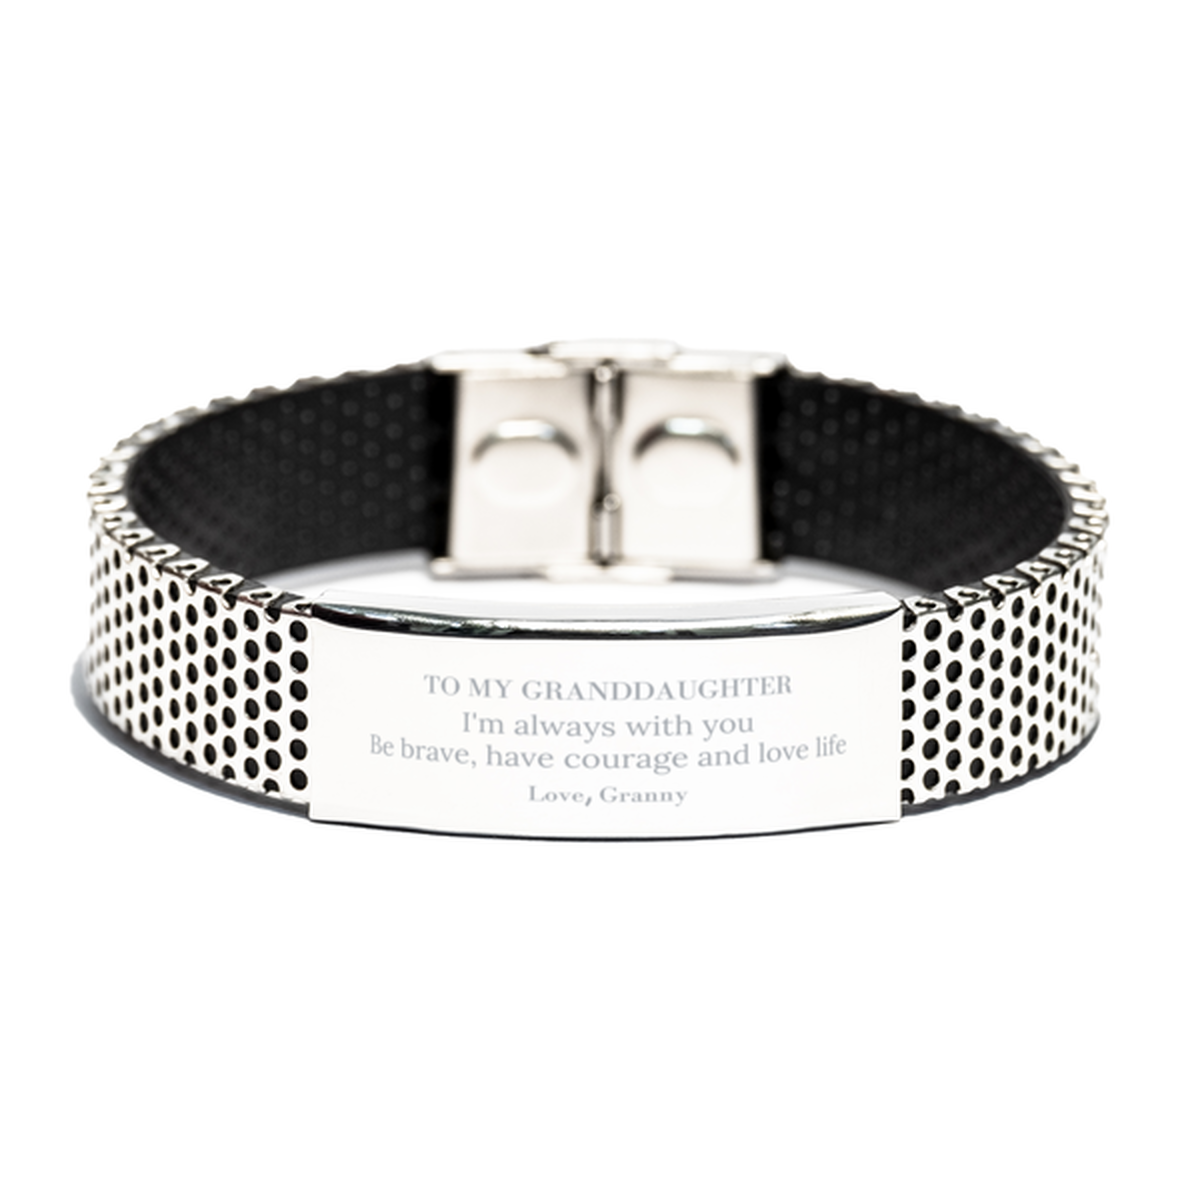 To My Granddaughter Gifts from Granny, Unique Stainless Steel Bracelet Inspirational Christmas Birthday Graduation Gifts for Granddaughter I'm always with you. Be brave, have courage and love life. Love, Granny